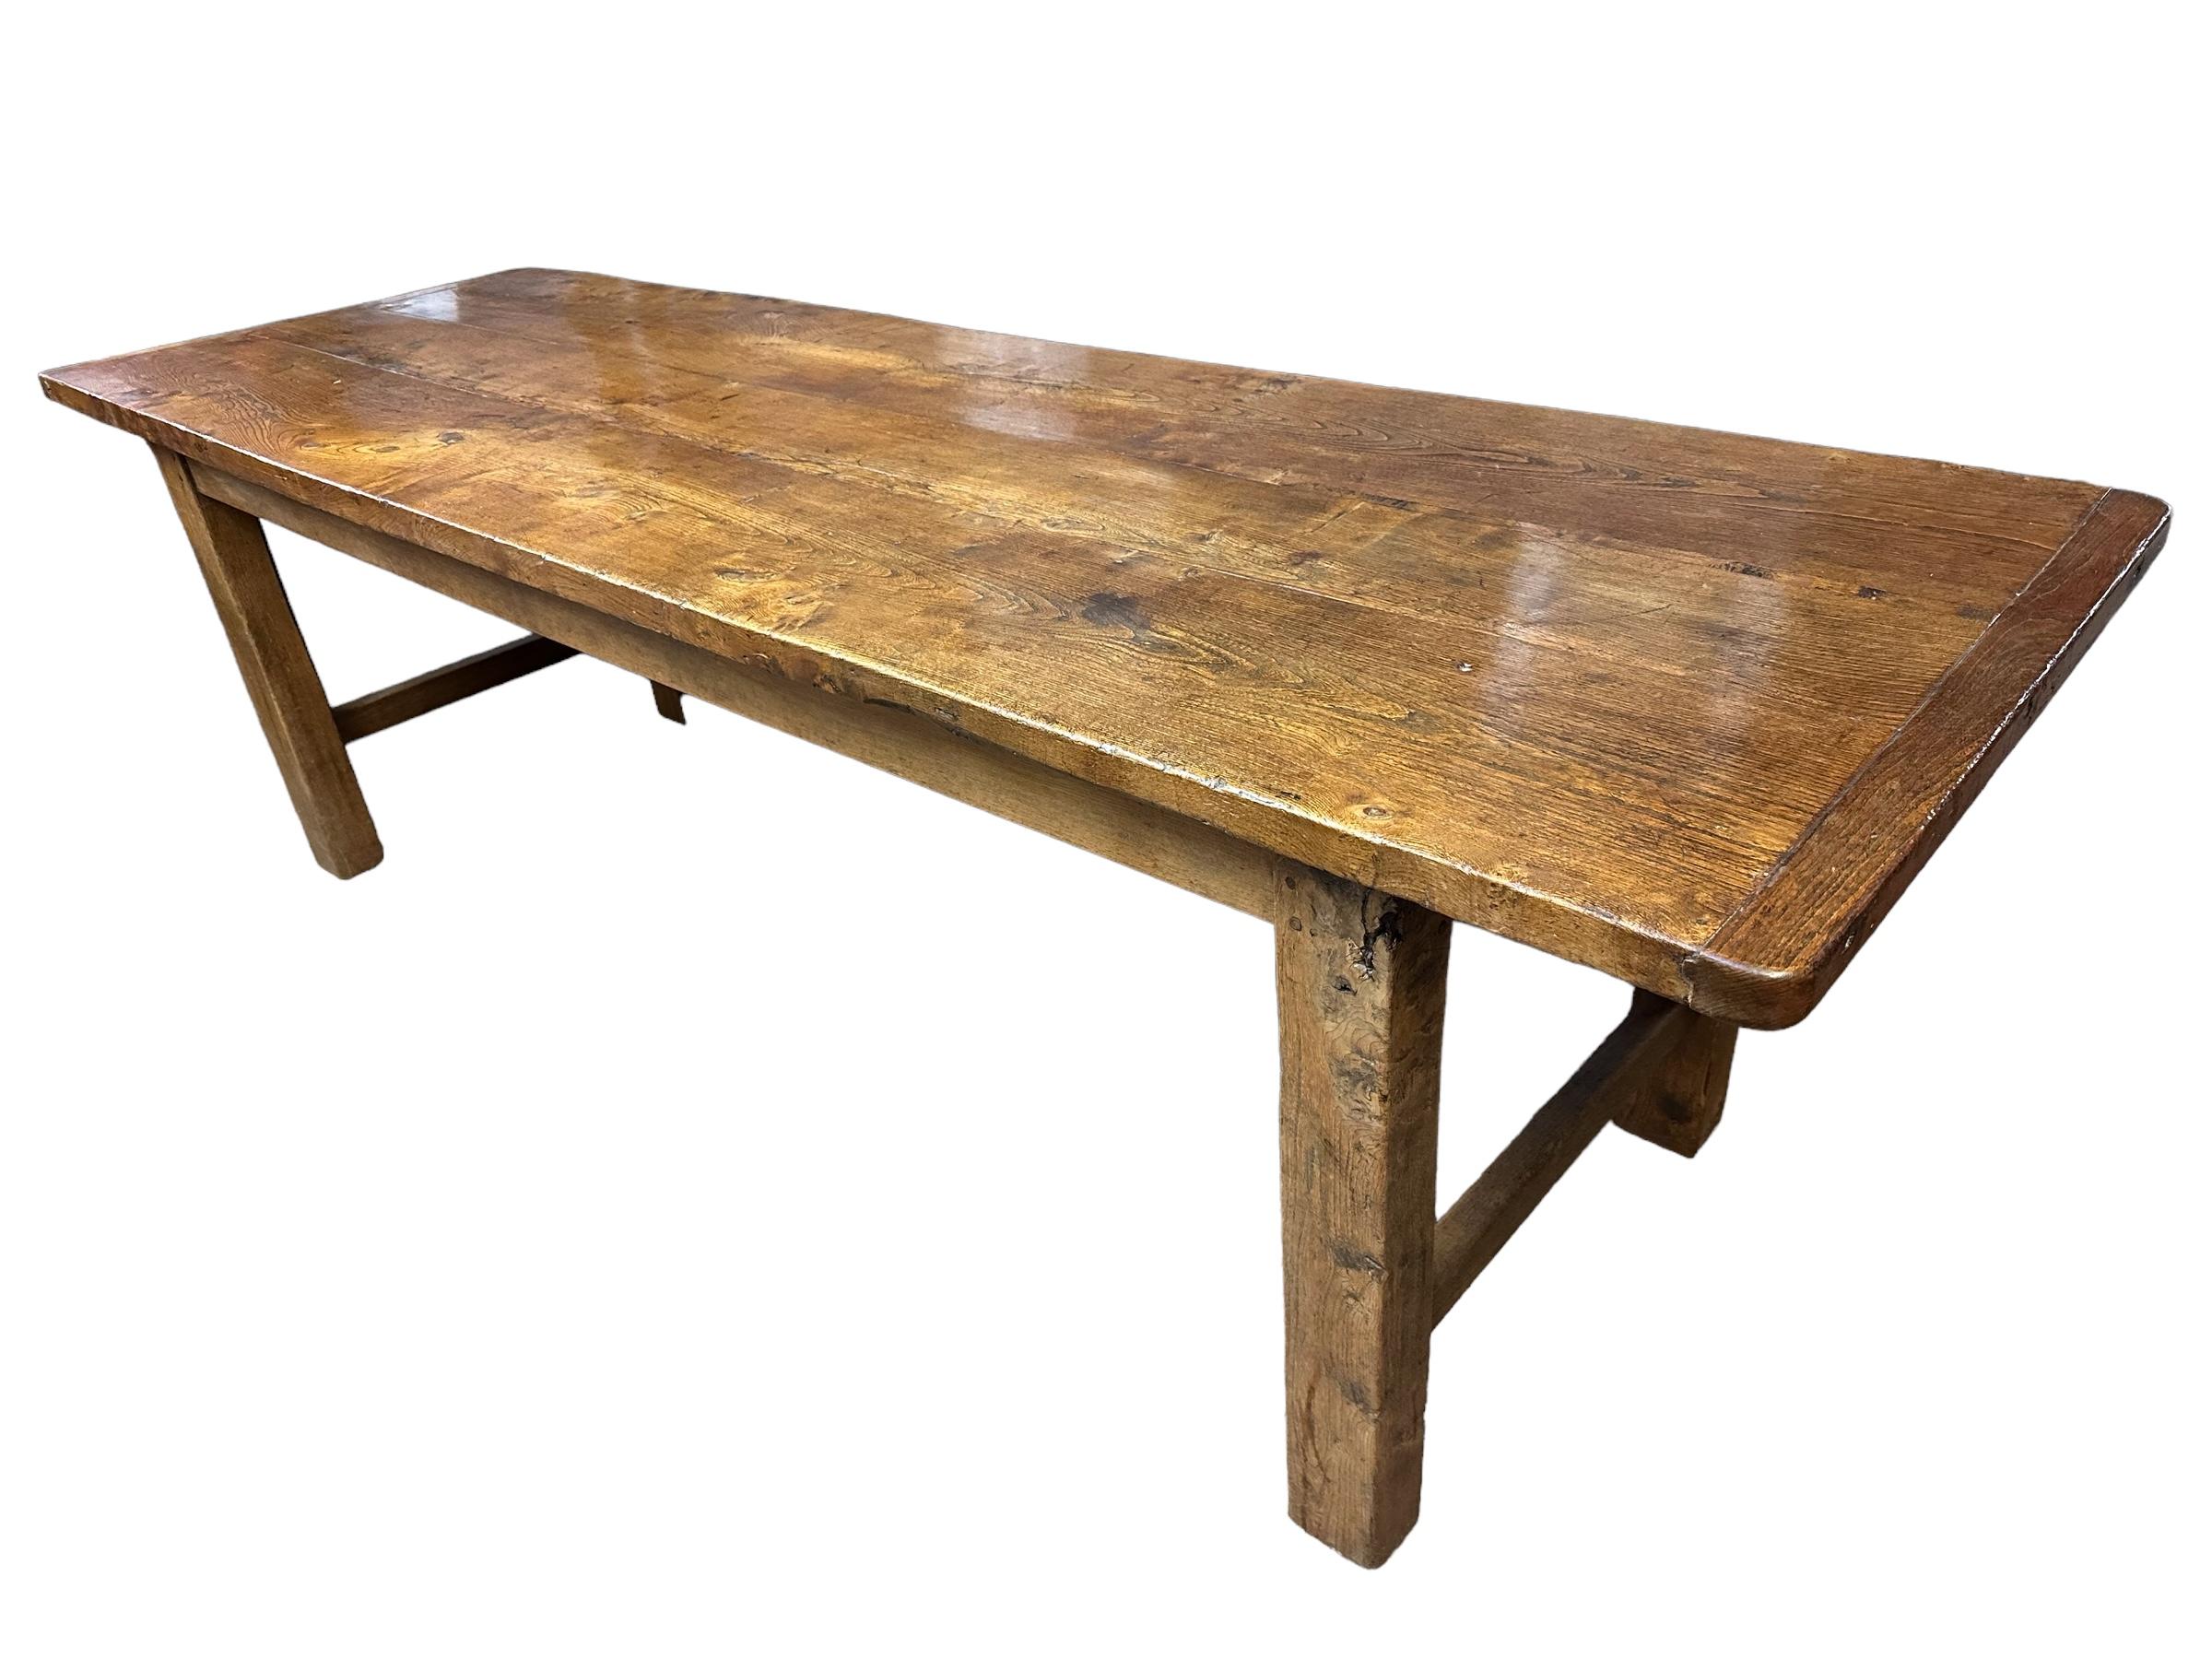 This is a sturdy elm farmhouse table from the early 19th century. It features a strong base with four square legs connected by end stretchers. The has a lovely patina and colour, and the top is full of character with cleated ends. it is a fantastic